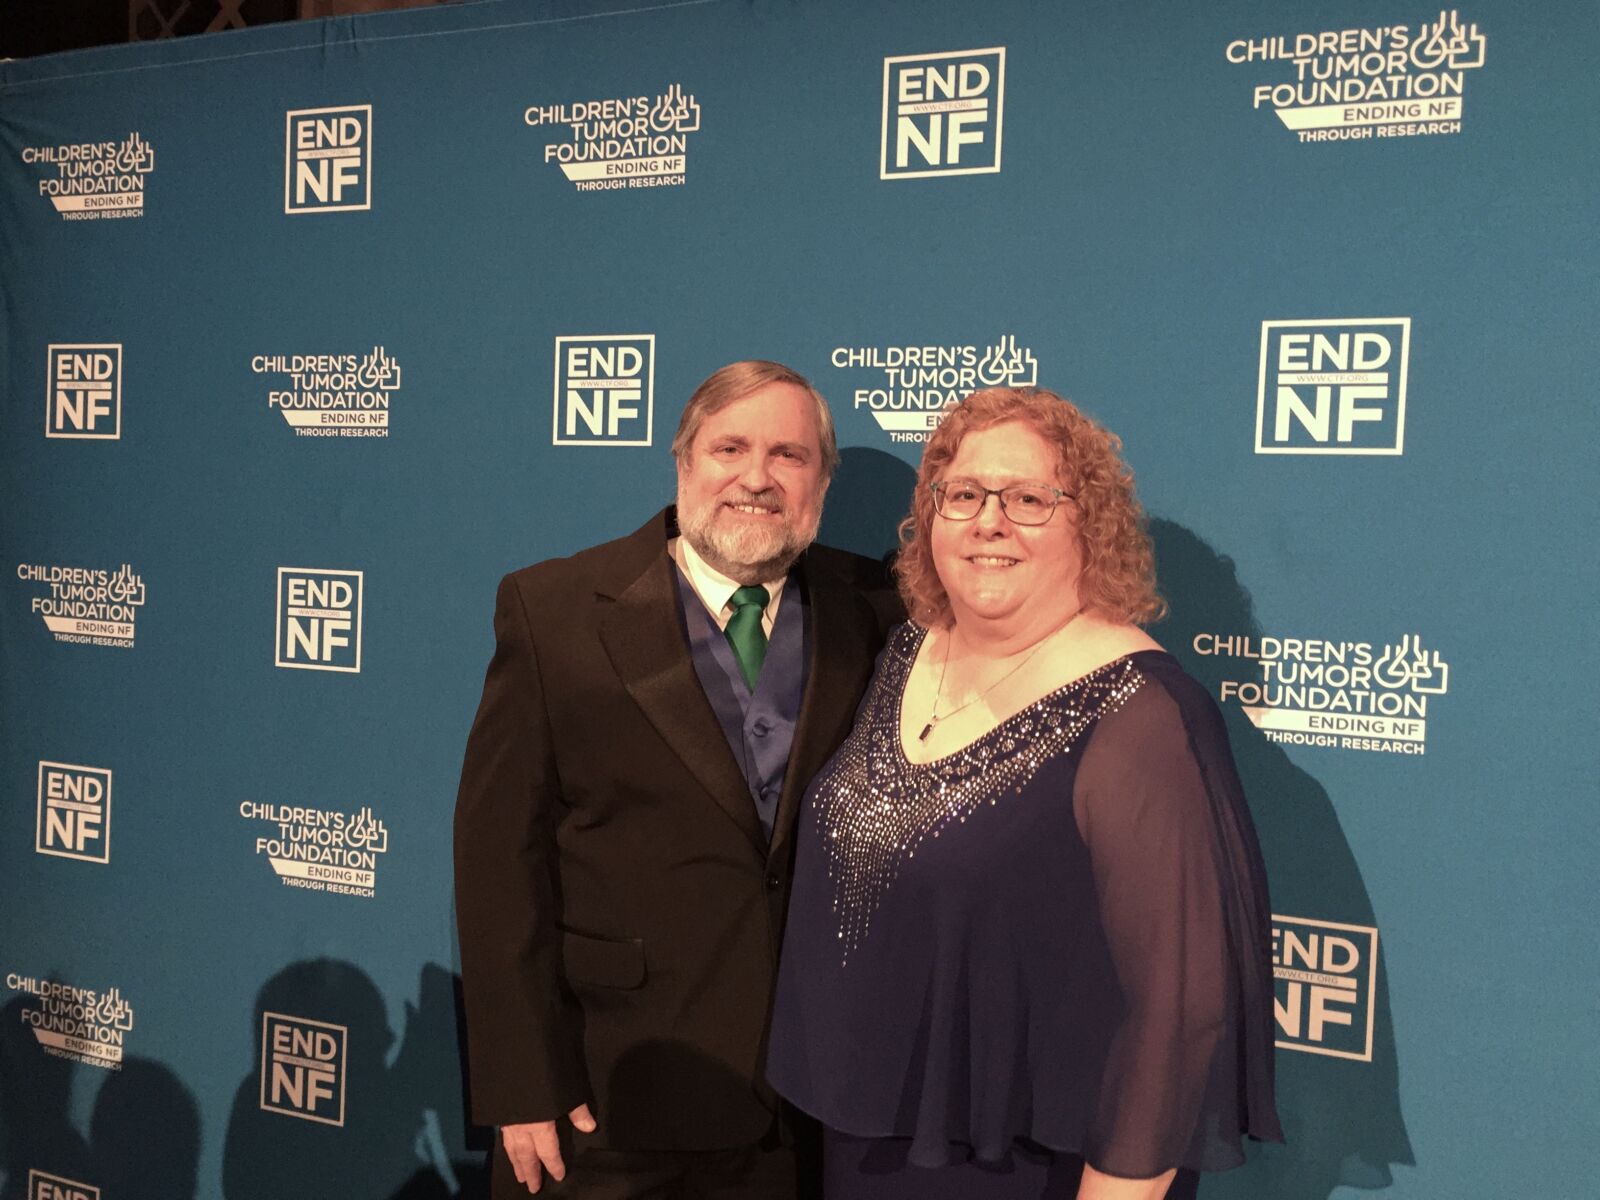 A man in a dark suit and a woman in a blue dress pose together in front of a blue backdrop with "END NF" and "Children's Tumor Foundation" logos.